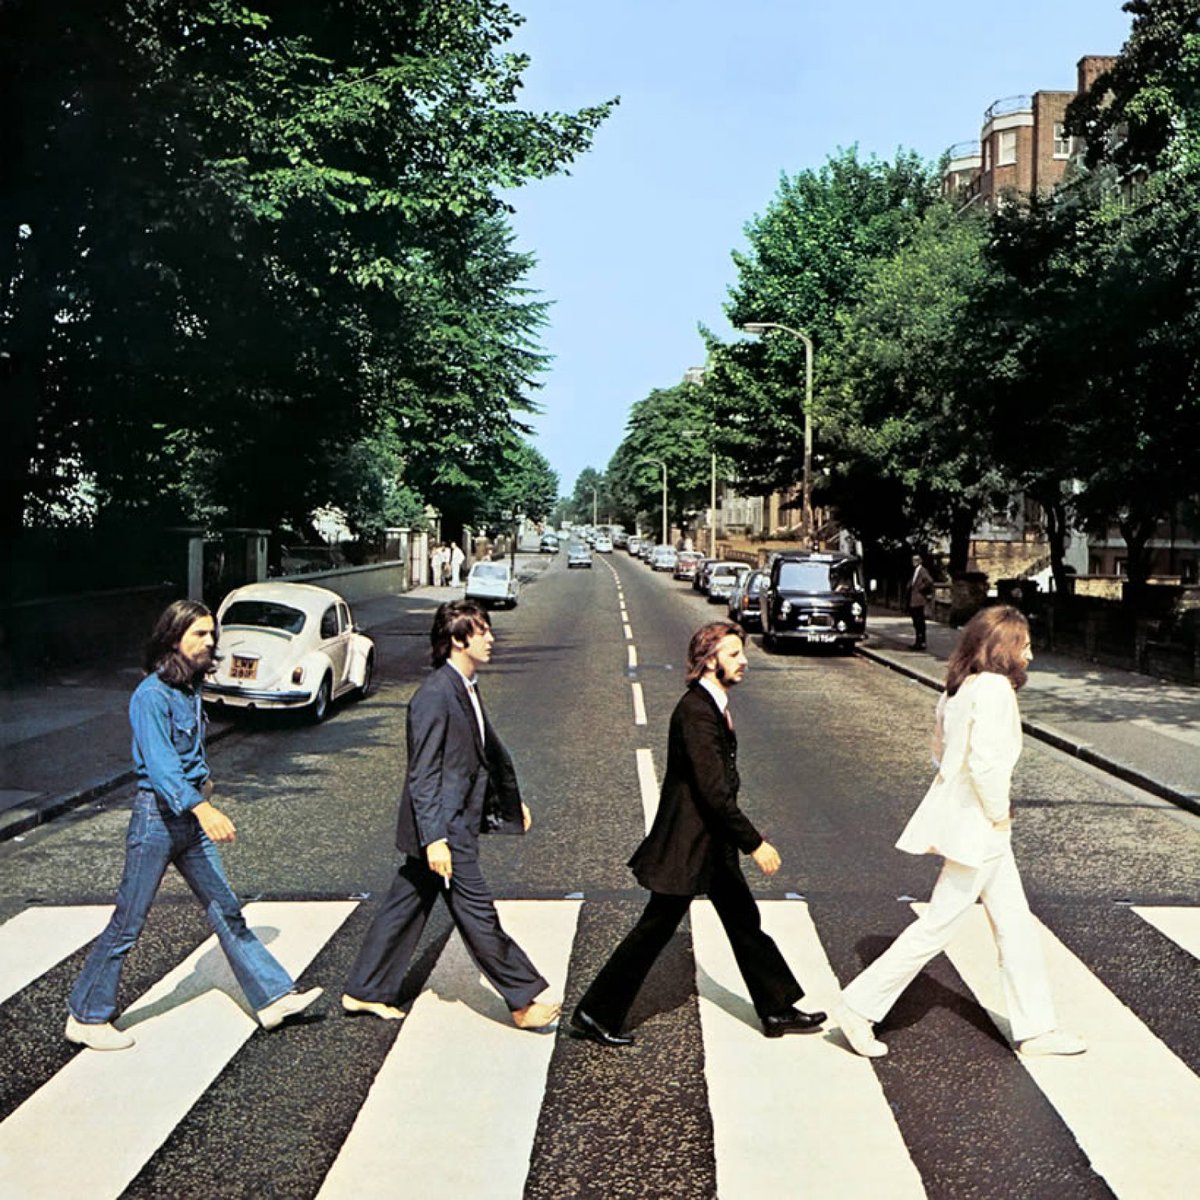 Taking an audio trip to #AbbeyRoad, you in? On the ✨season finale✨ of #ALifeInLyrics, @PaulMcCartney discusses @thebeatles's ”Golden Slumbers,” “Carry That Weight,” and “The End”: apple.co/3U2so5N